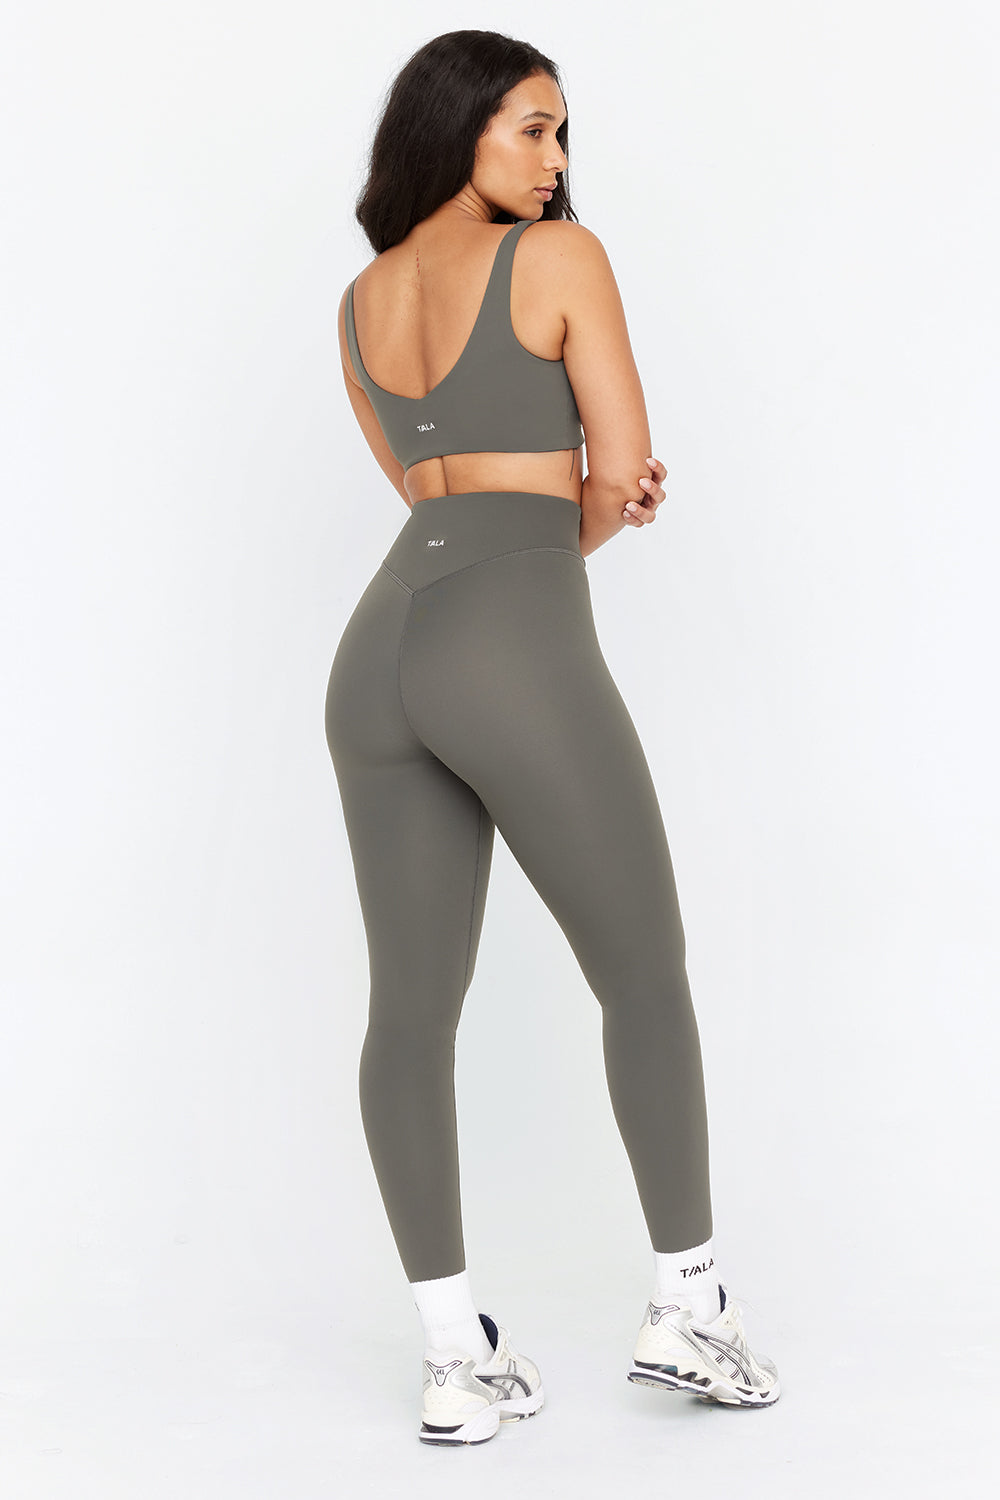 Cos Leggings Review | International Society of Precision Agriculture